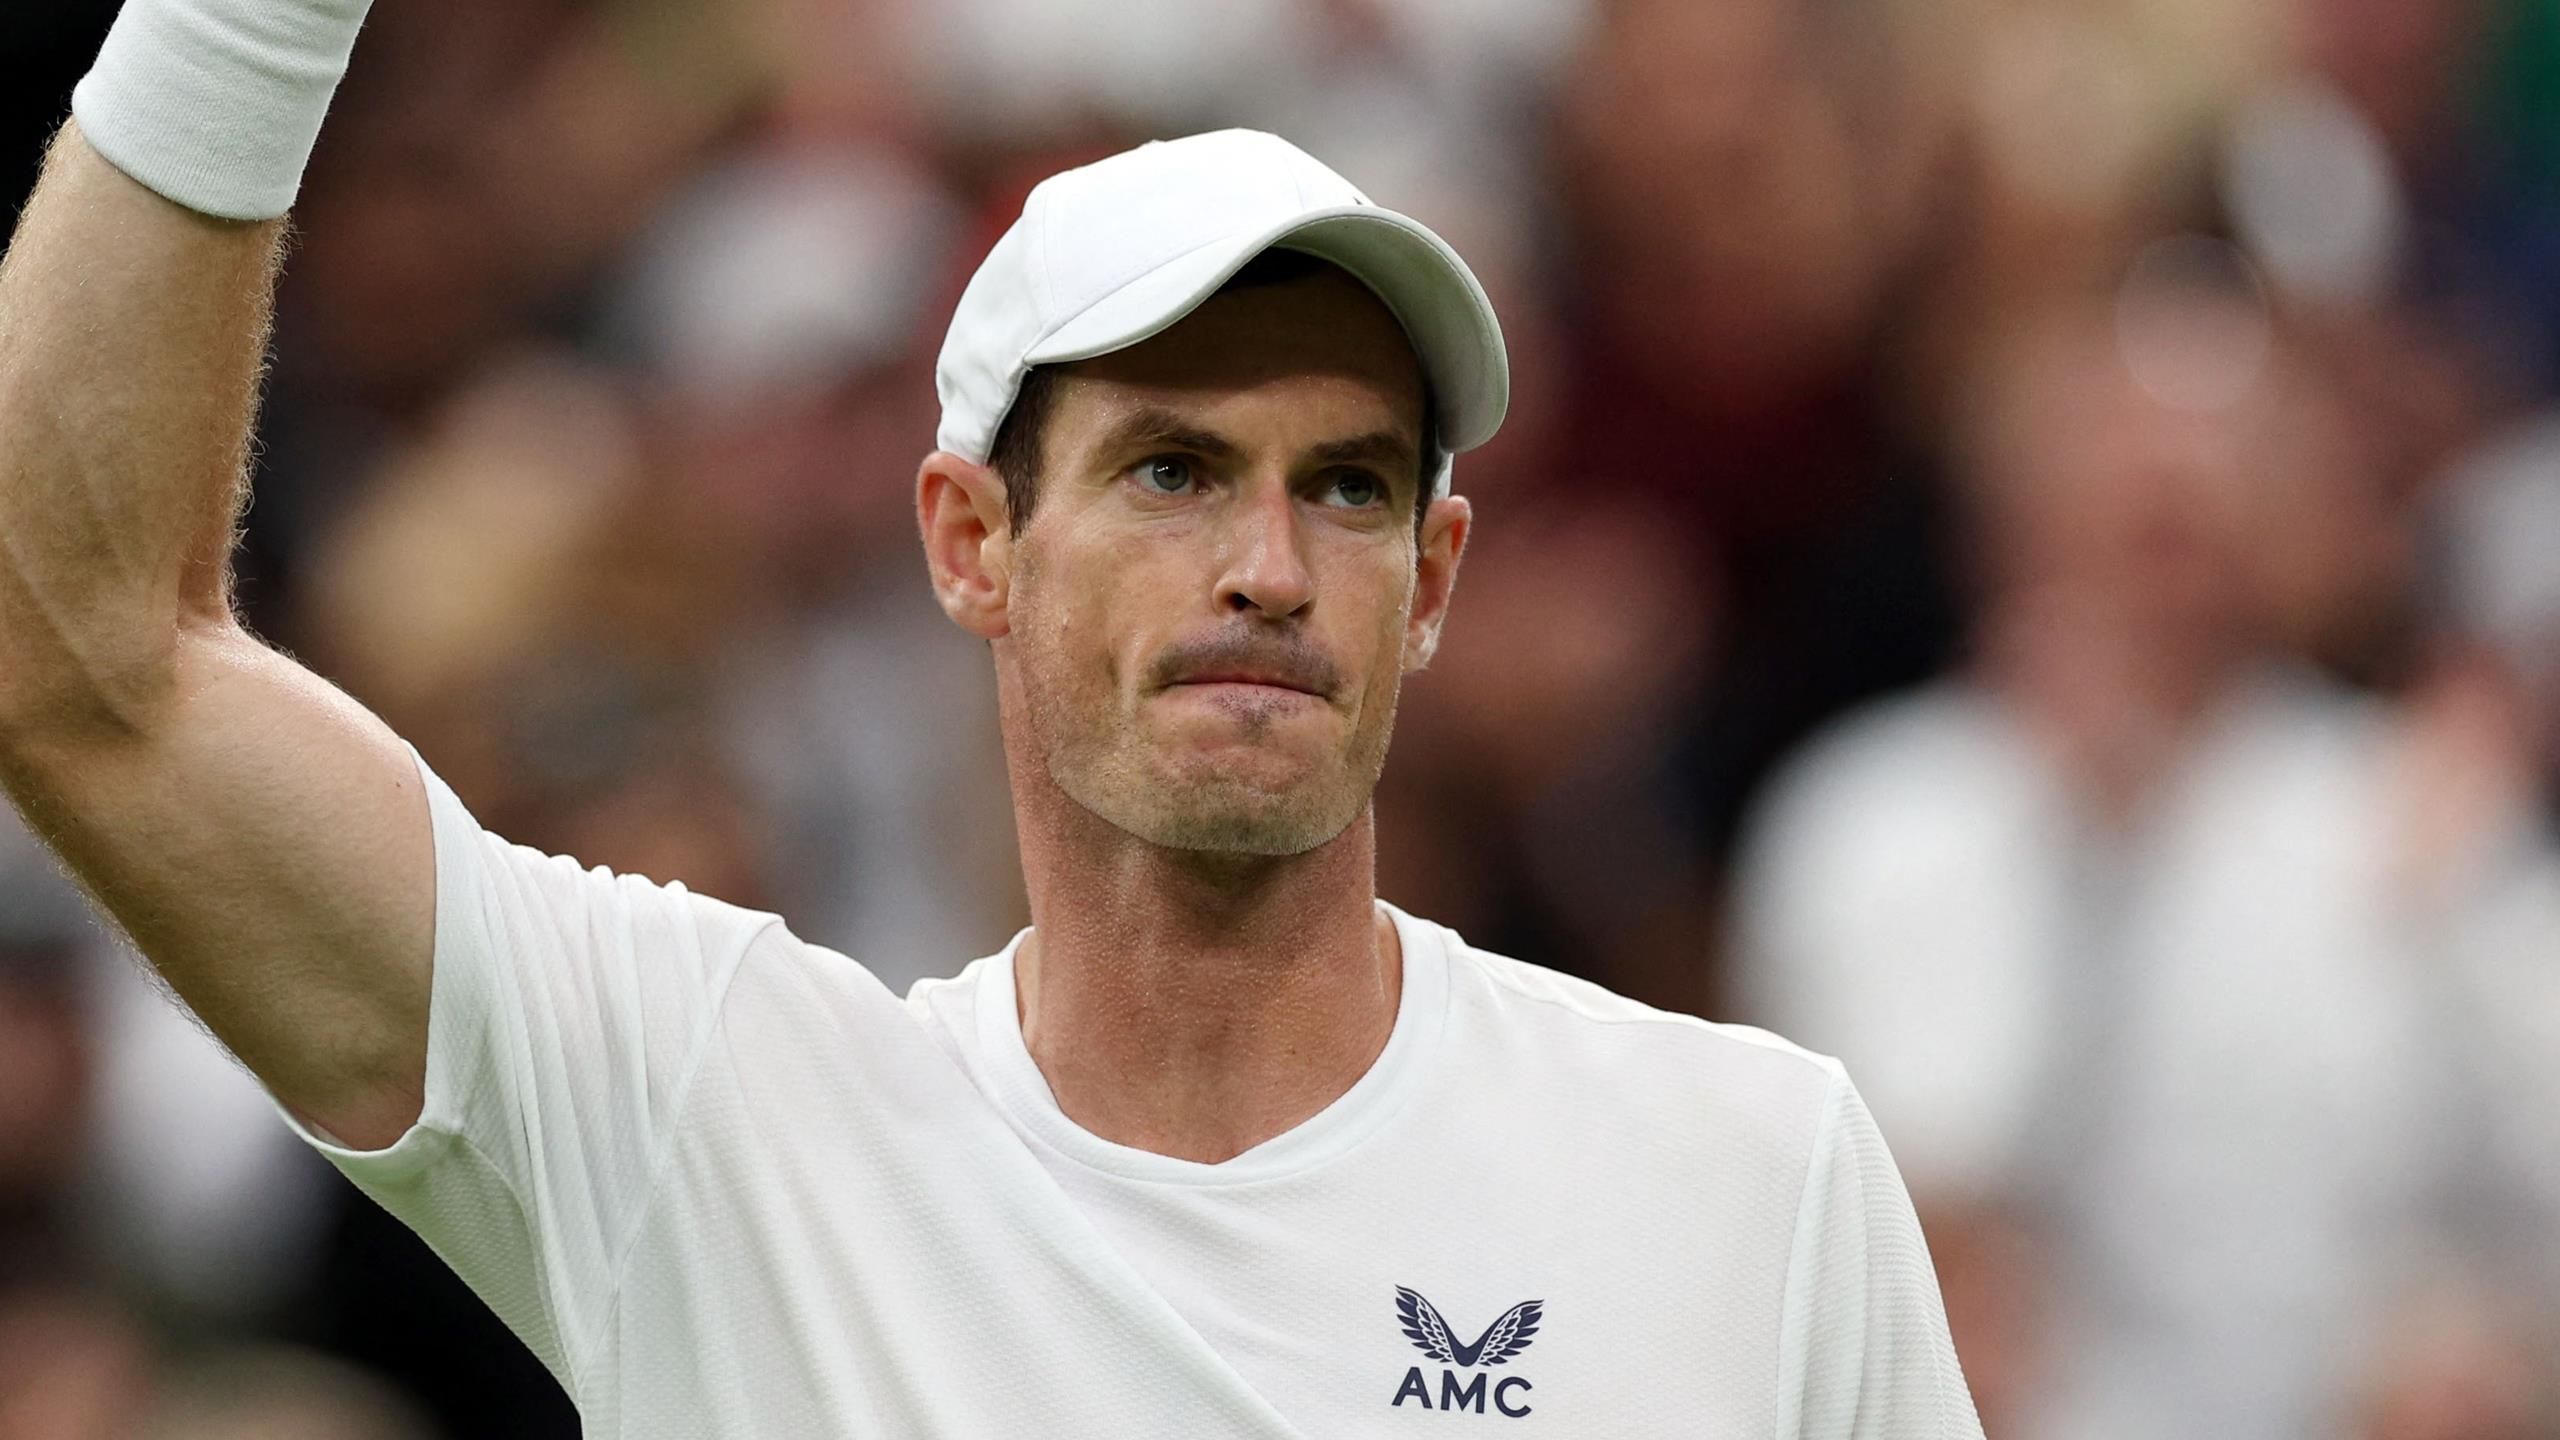 Andy Murray has perfect draw for Wimbledon run after victory over Ryan Peniston says Mats Wilander